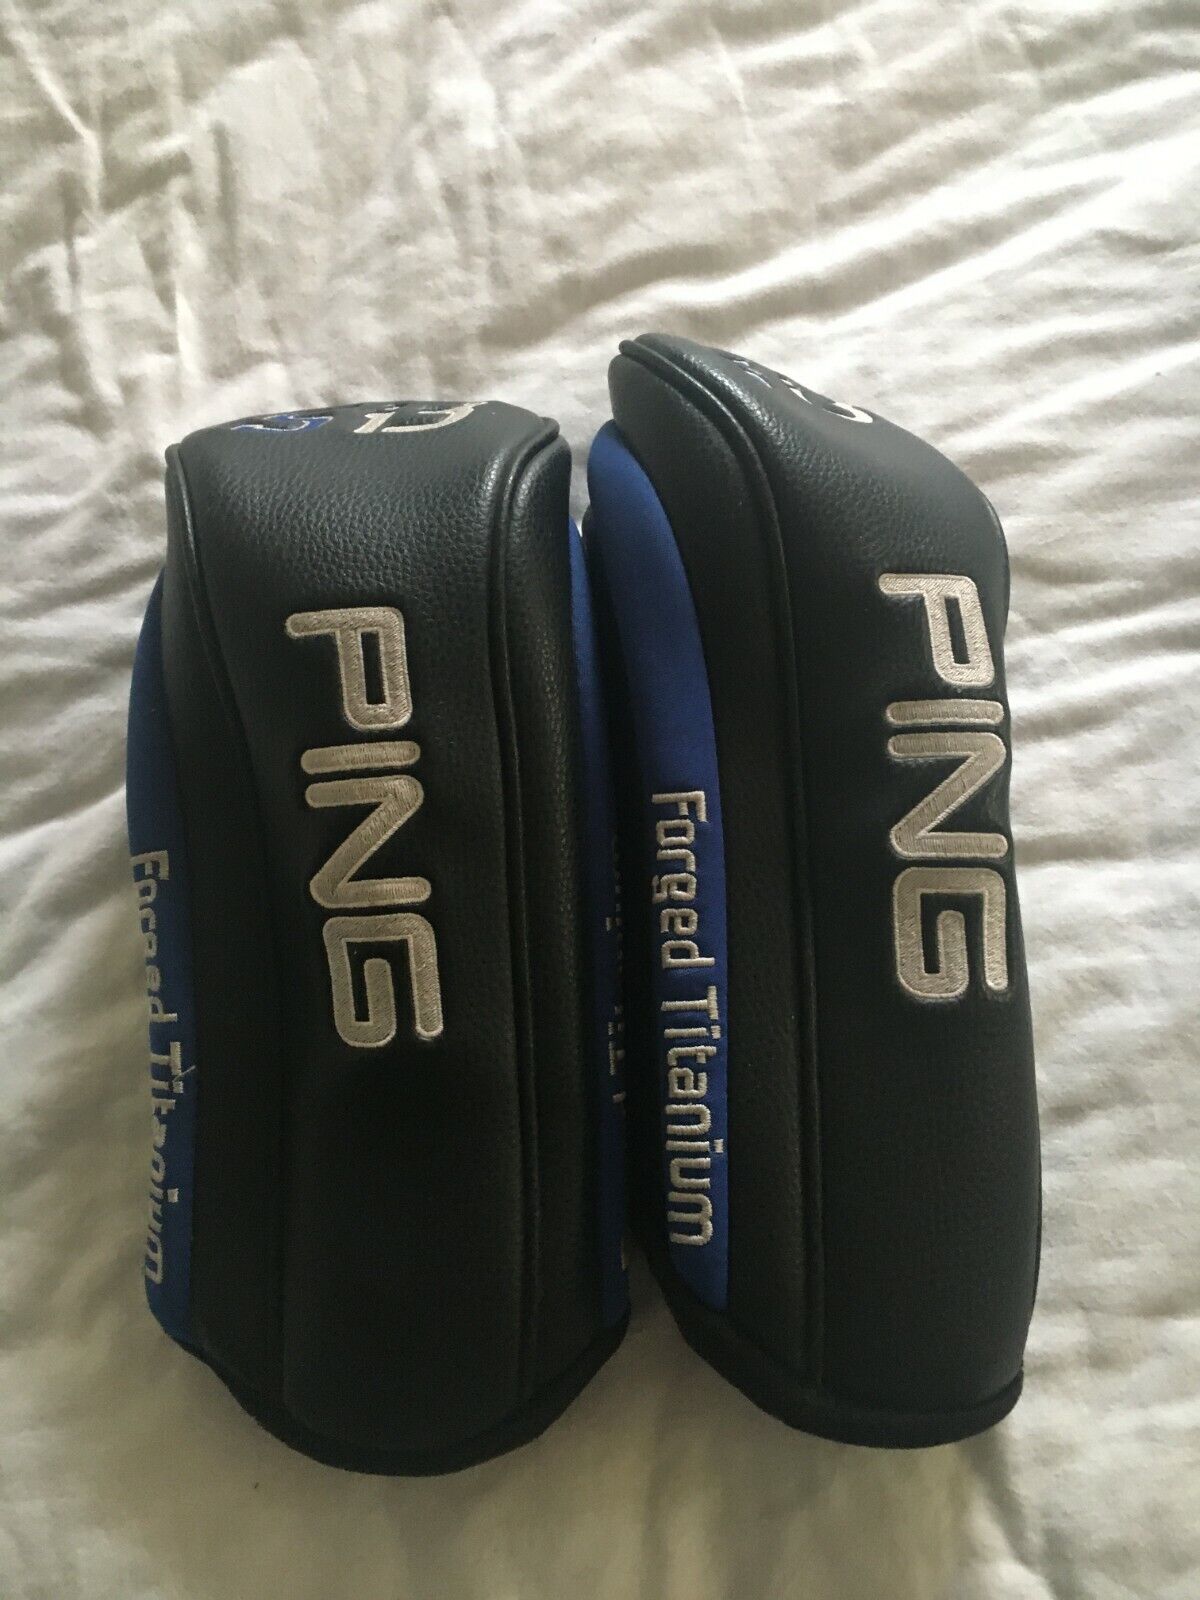 Two PING GOLF S i3 DRIVER HEADCOVER - Forged Titanium Si3 Blue Head Cover 